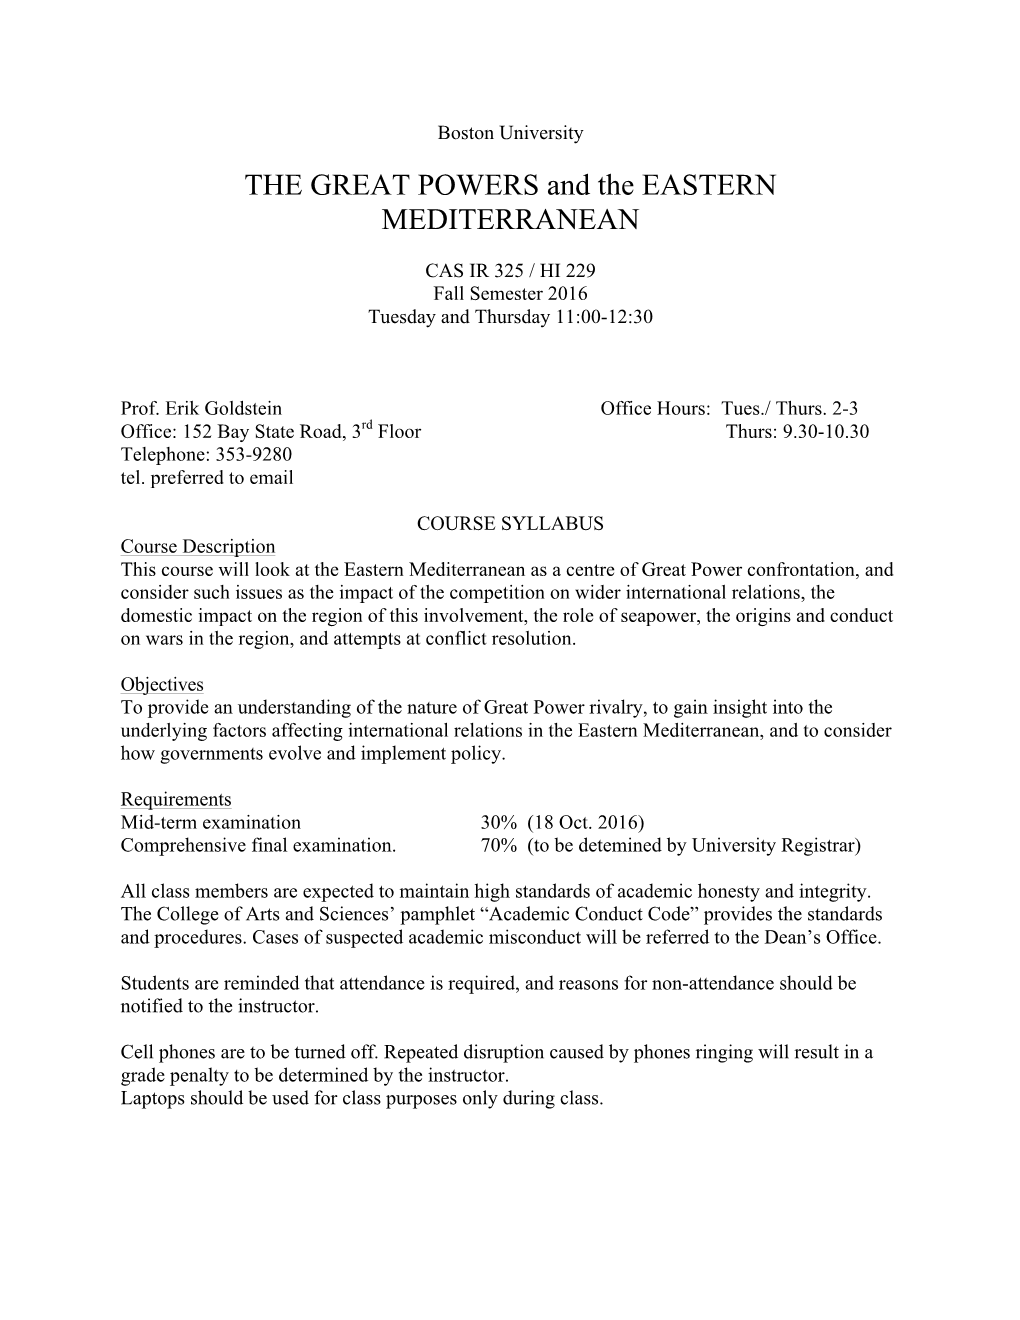 THE GREAT POWERS and the EASTERN MEDITERRANEAN